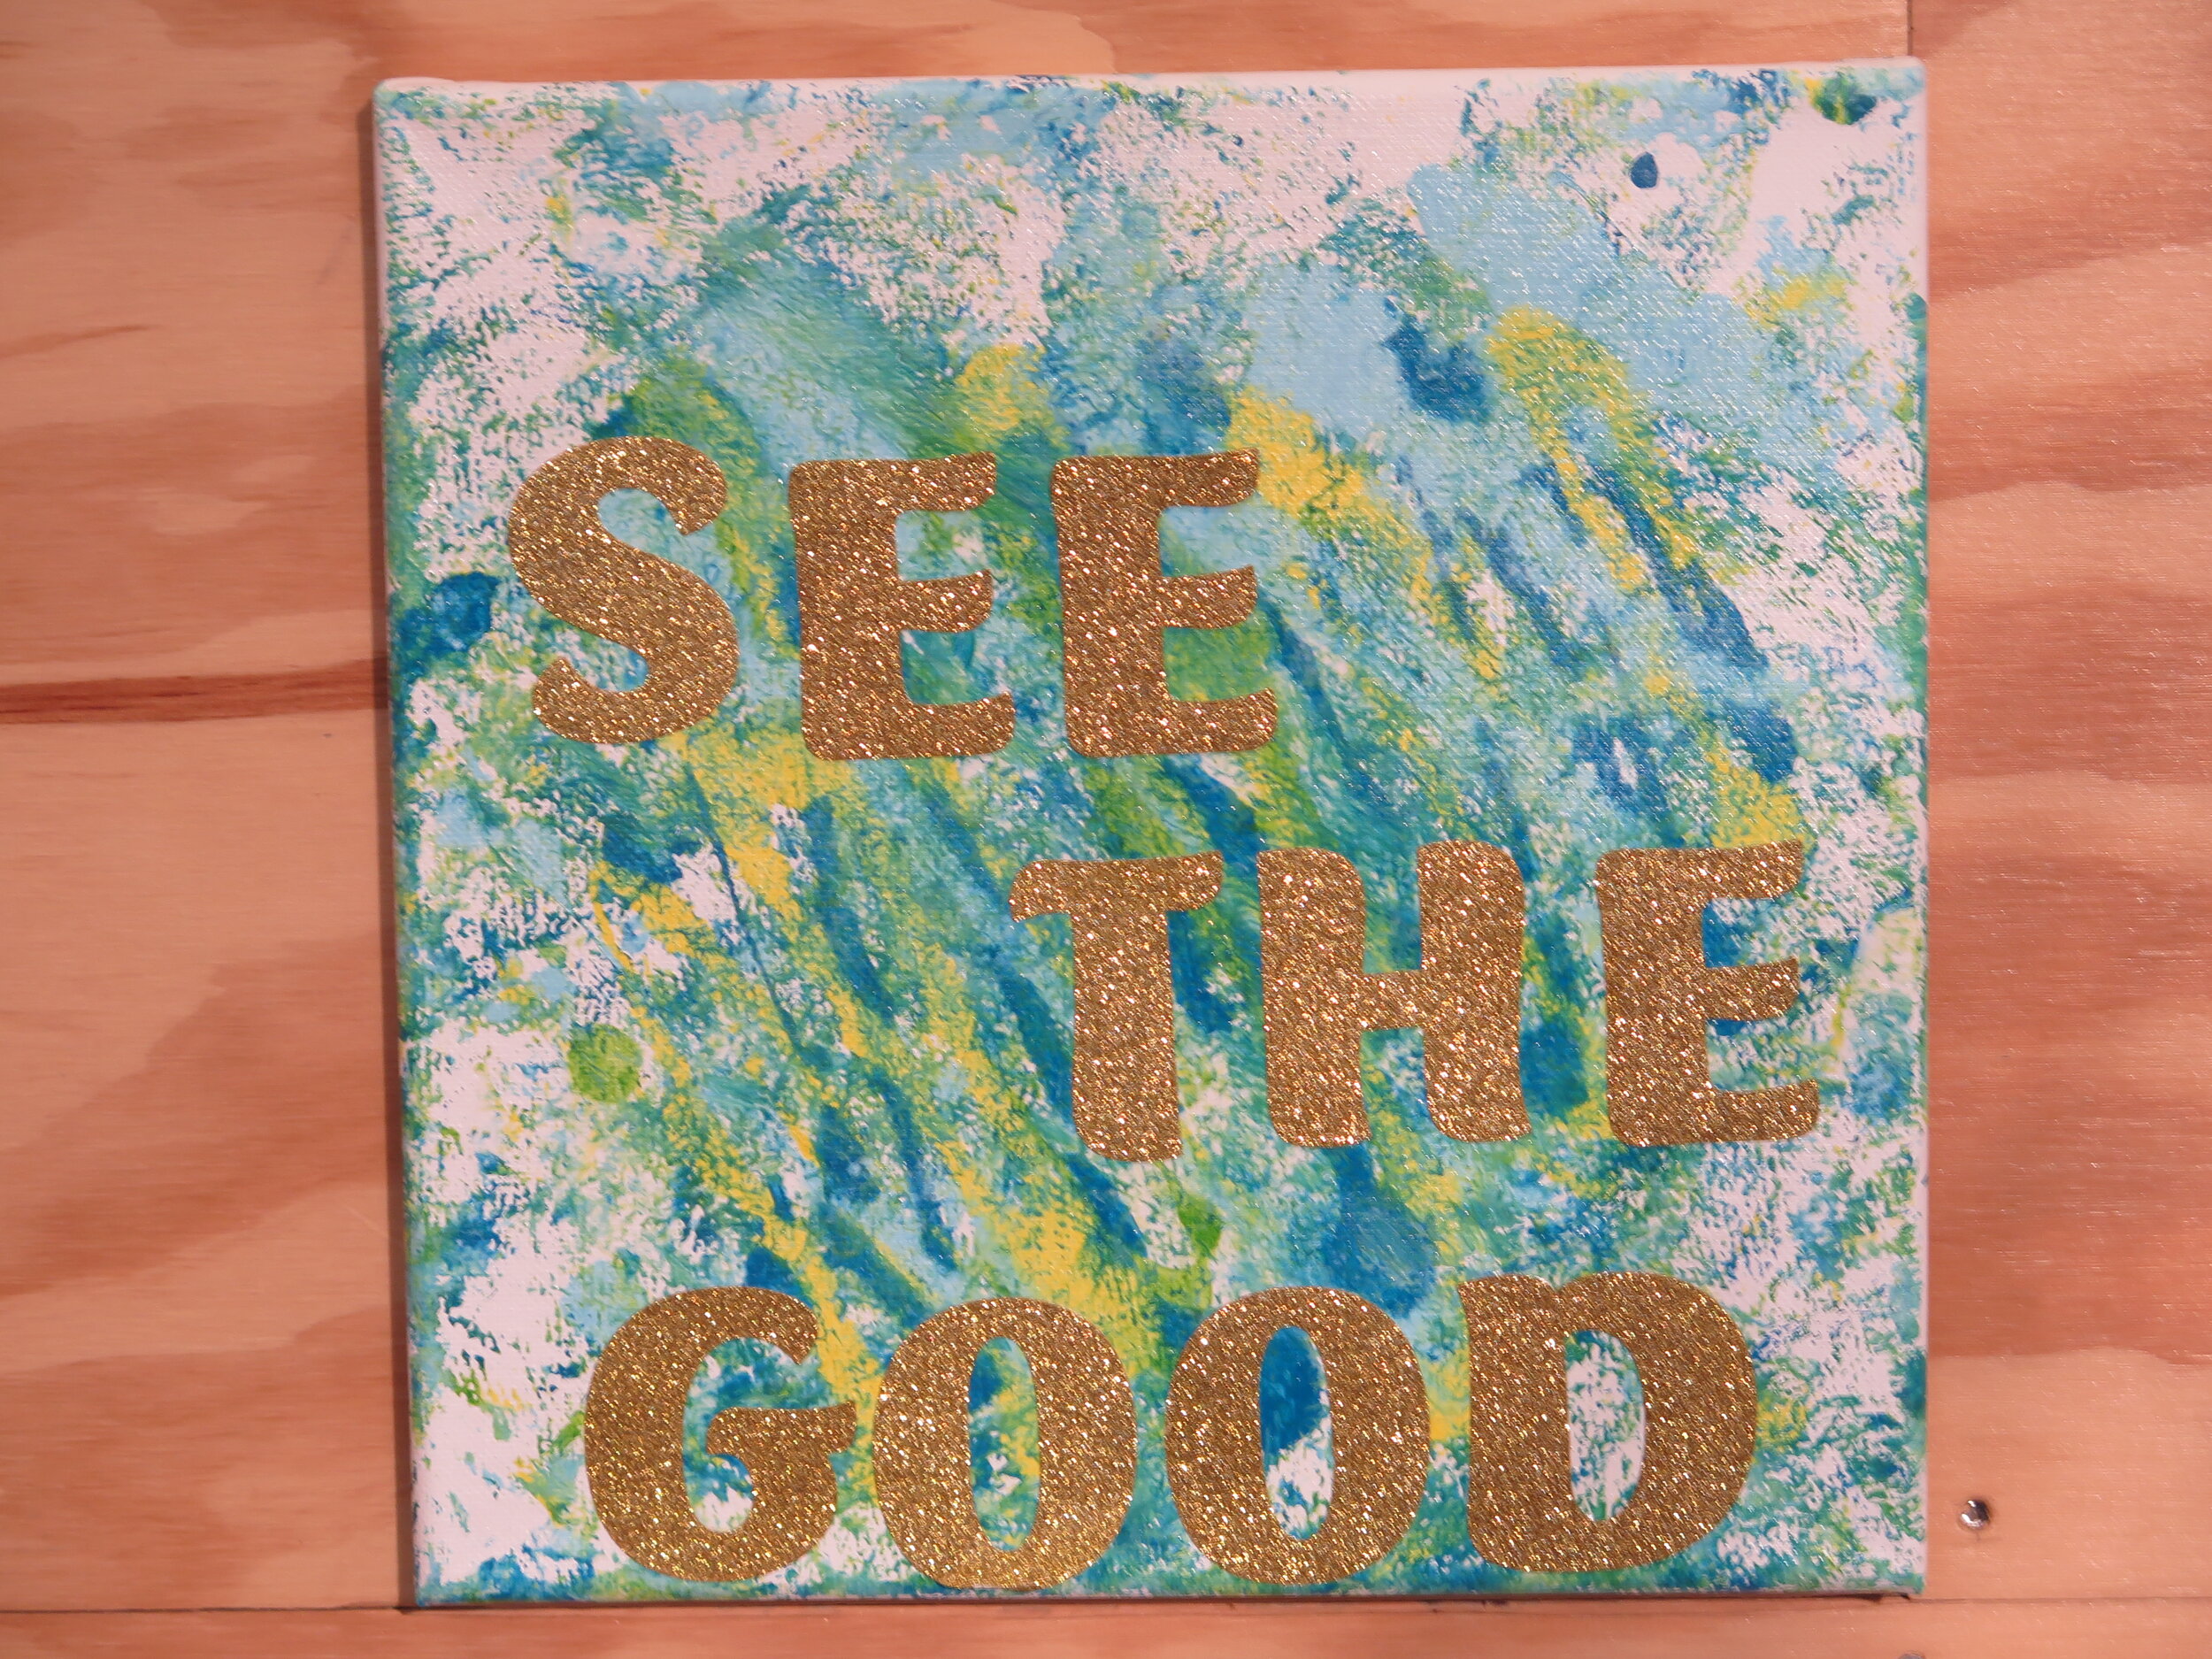 See the Good (Emotions) by Baylei Jones $15